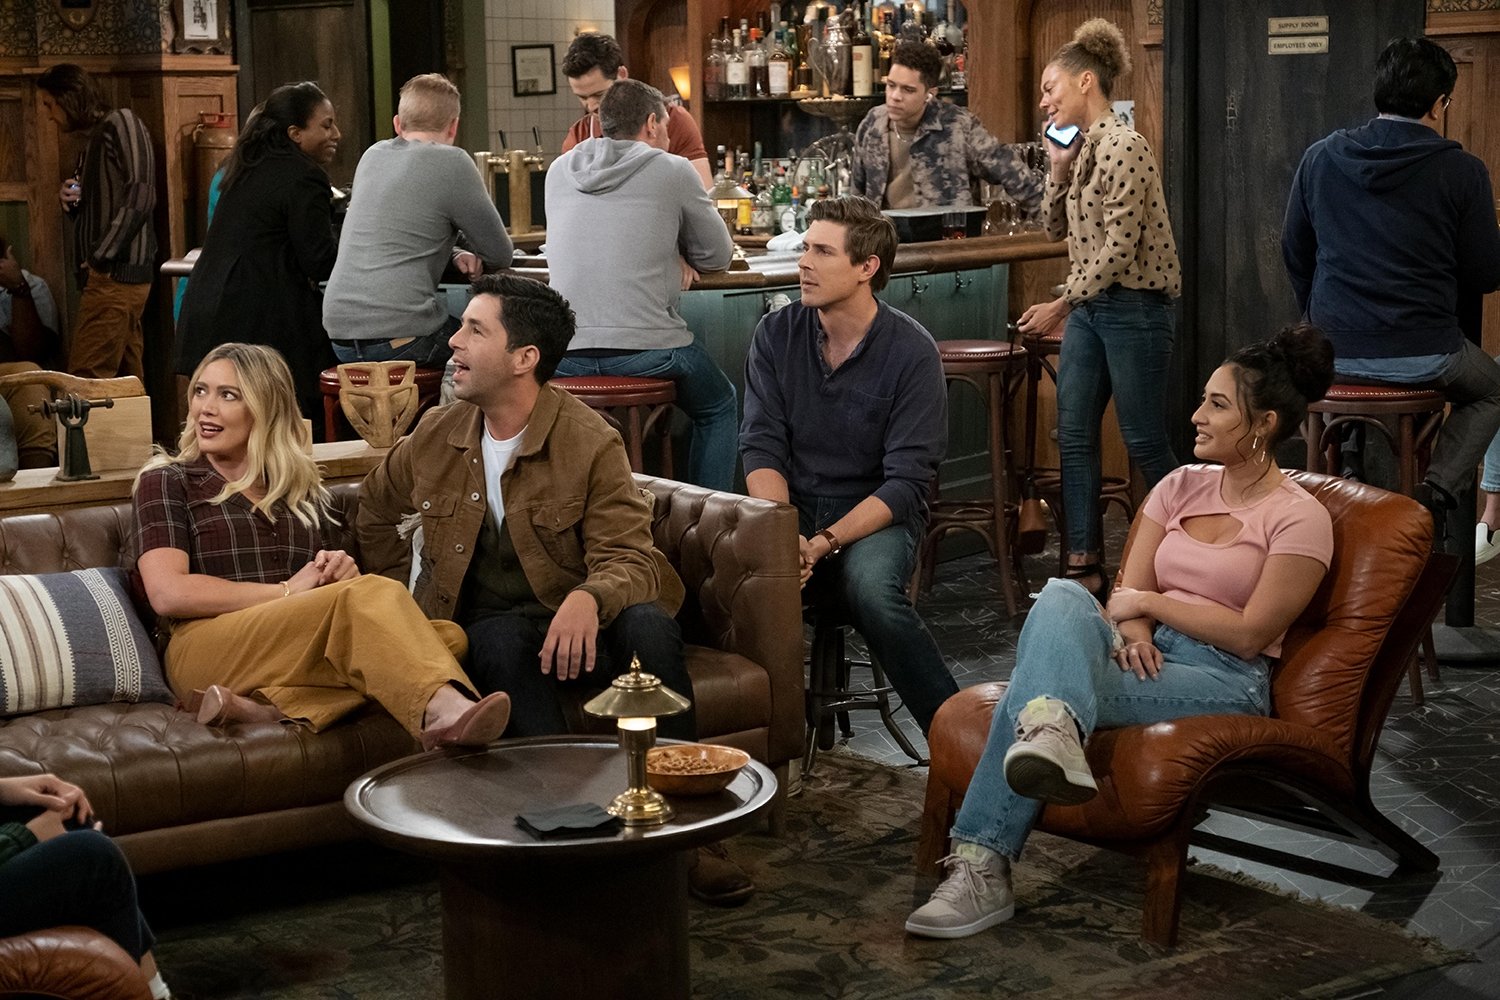 Sophie (Hilary Duff), Drew (Josh Peck), Charlie (Tom Ainsley), Jesse (Chris Lowell), and Valentina (Francia Raisa) in How I Met Your Father Season 1